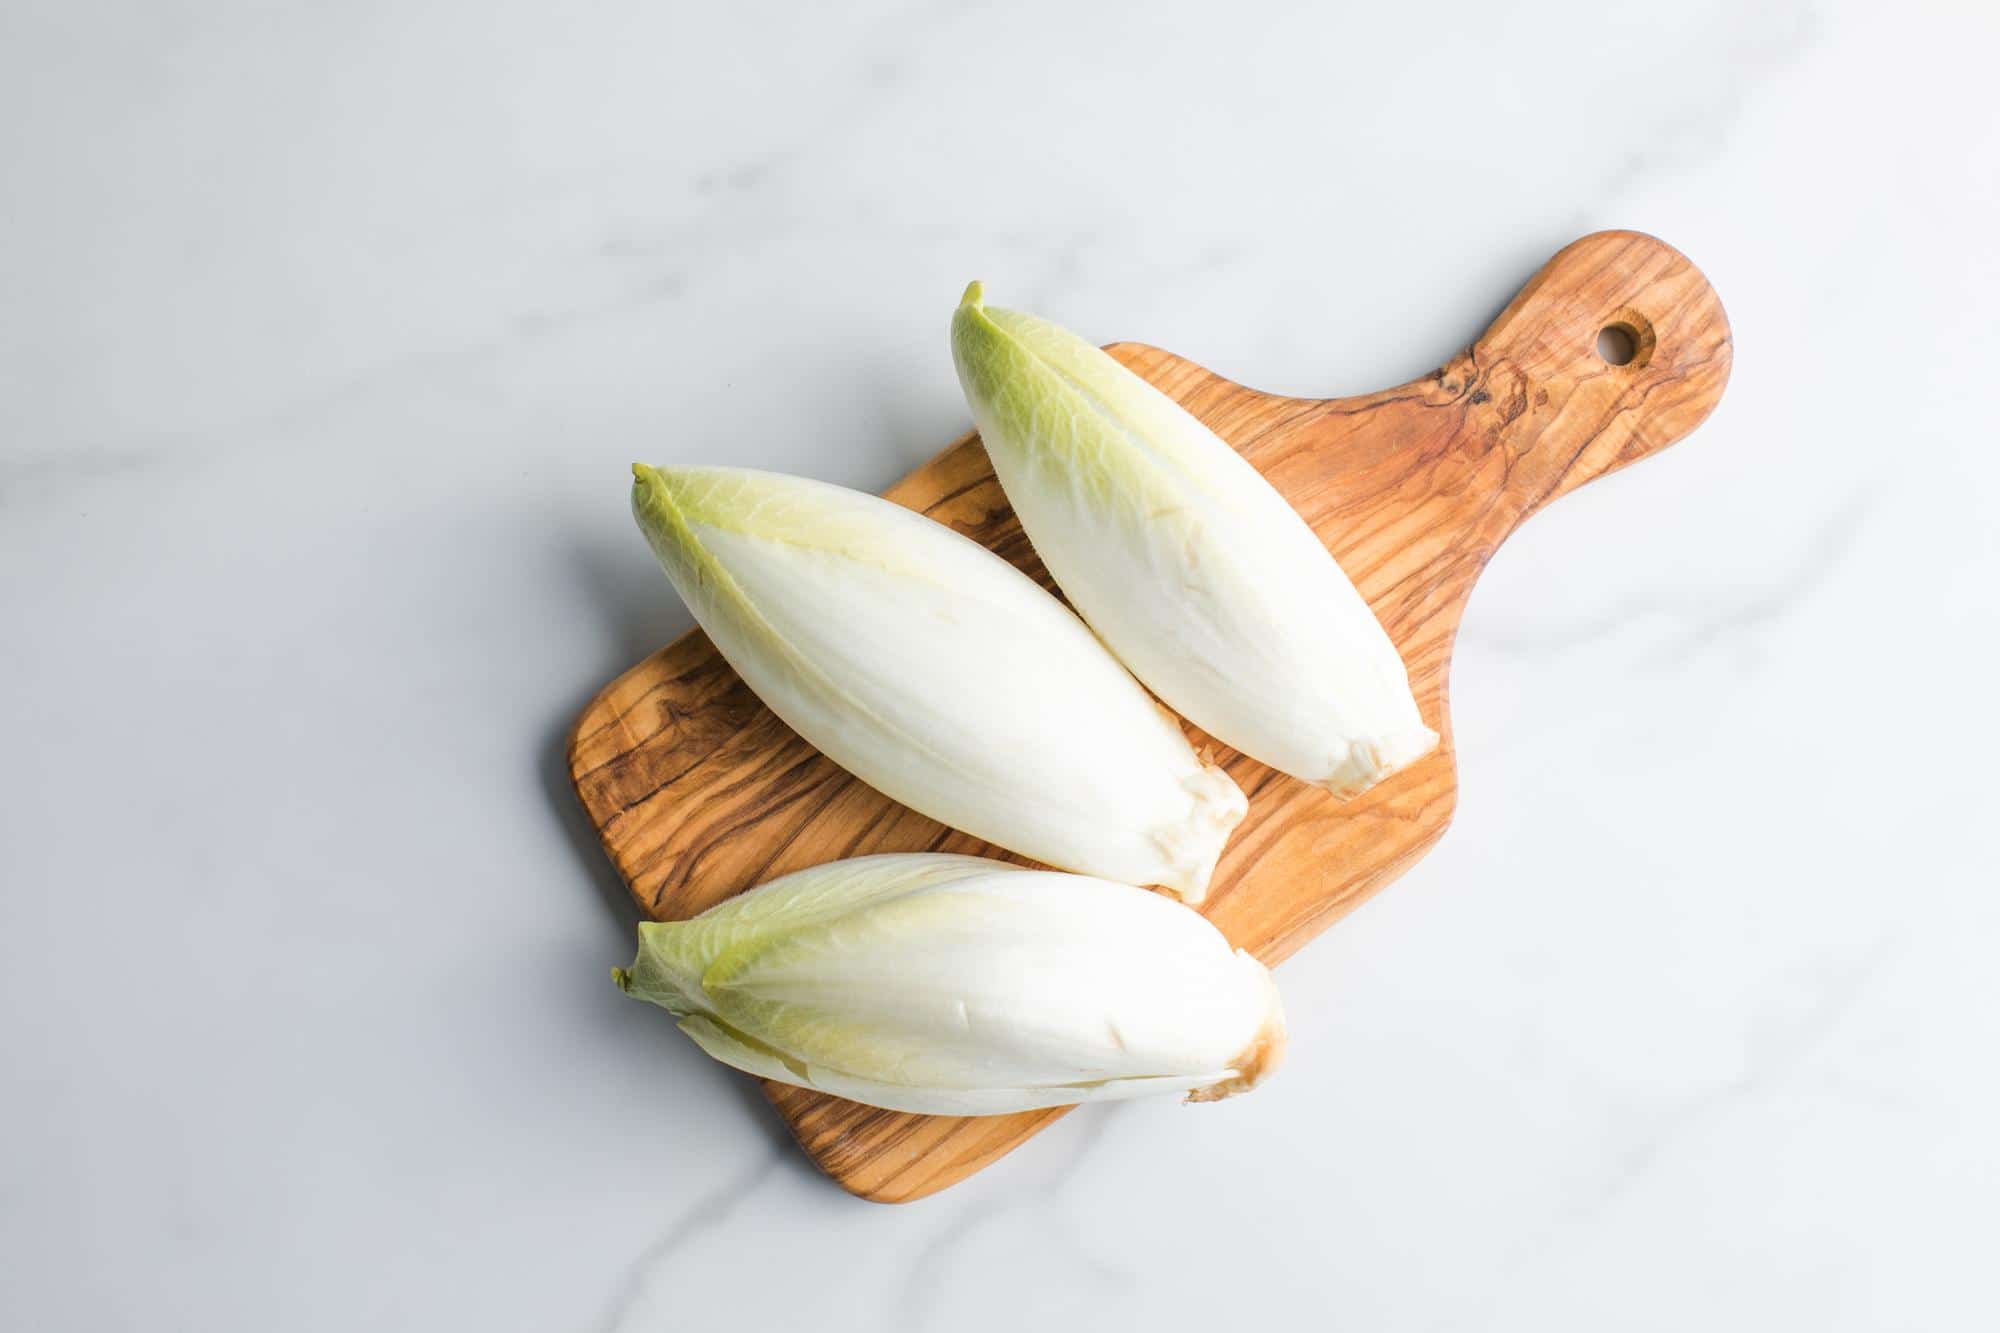 Endive: The Versatile Delight for Palate and Health